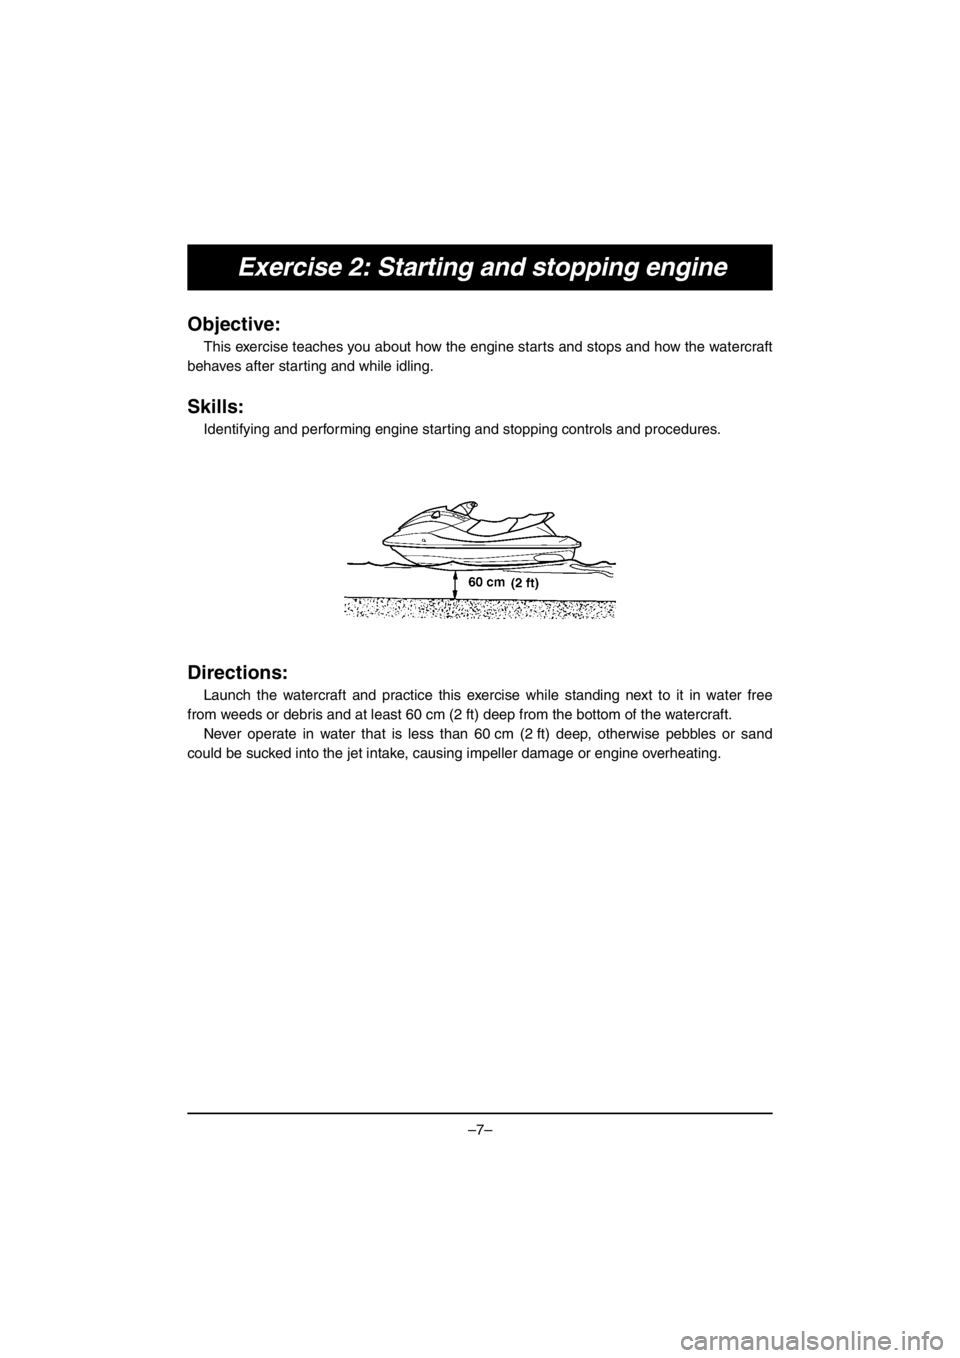 YAMAHA EX 2017  Owners Manual –7–
Exercise 2: Starting and stopping engine
Objective:
This exercise teaches you about how the engine starts and stops and how the watercraft
behaves after starting and while idling.
Skills:
Iden